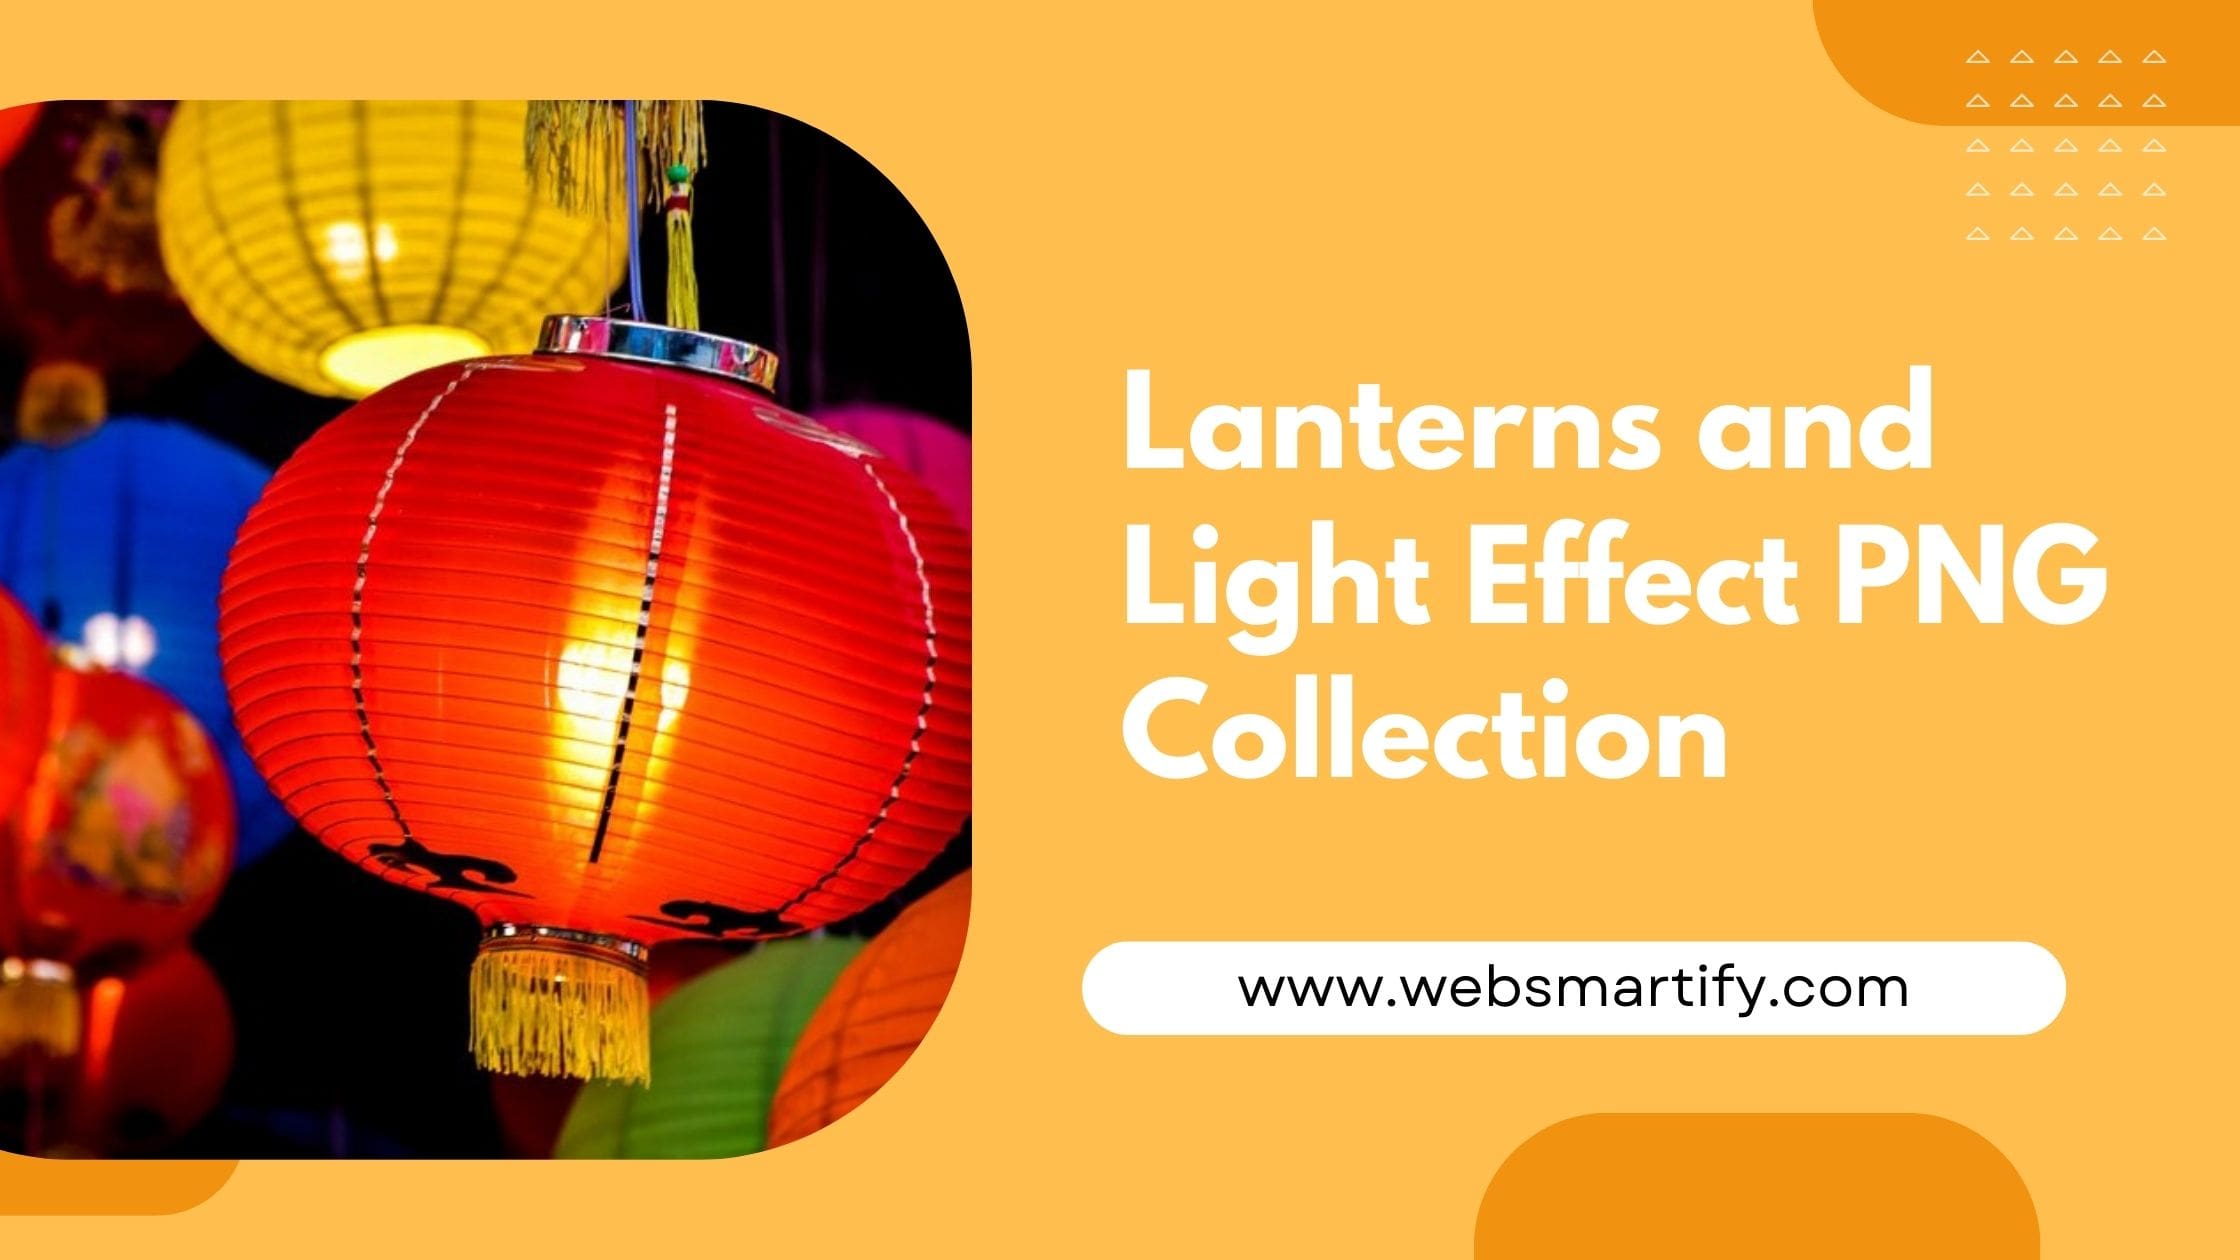 Lanterns and Light Effect PNG collection showcasing high-quality images for graphic designs - Websmartify